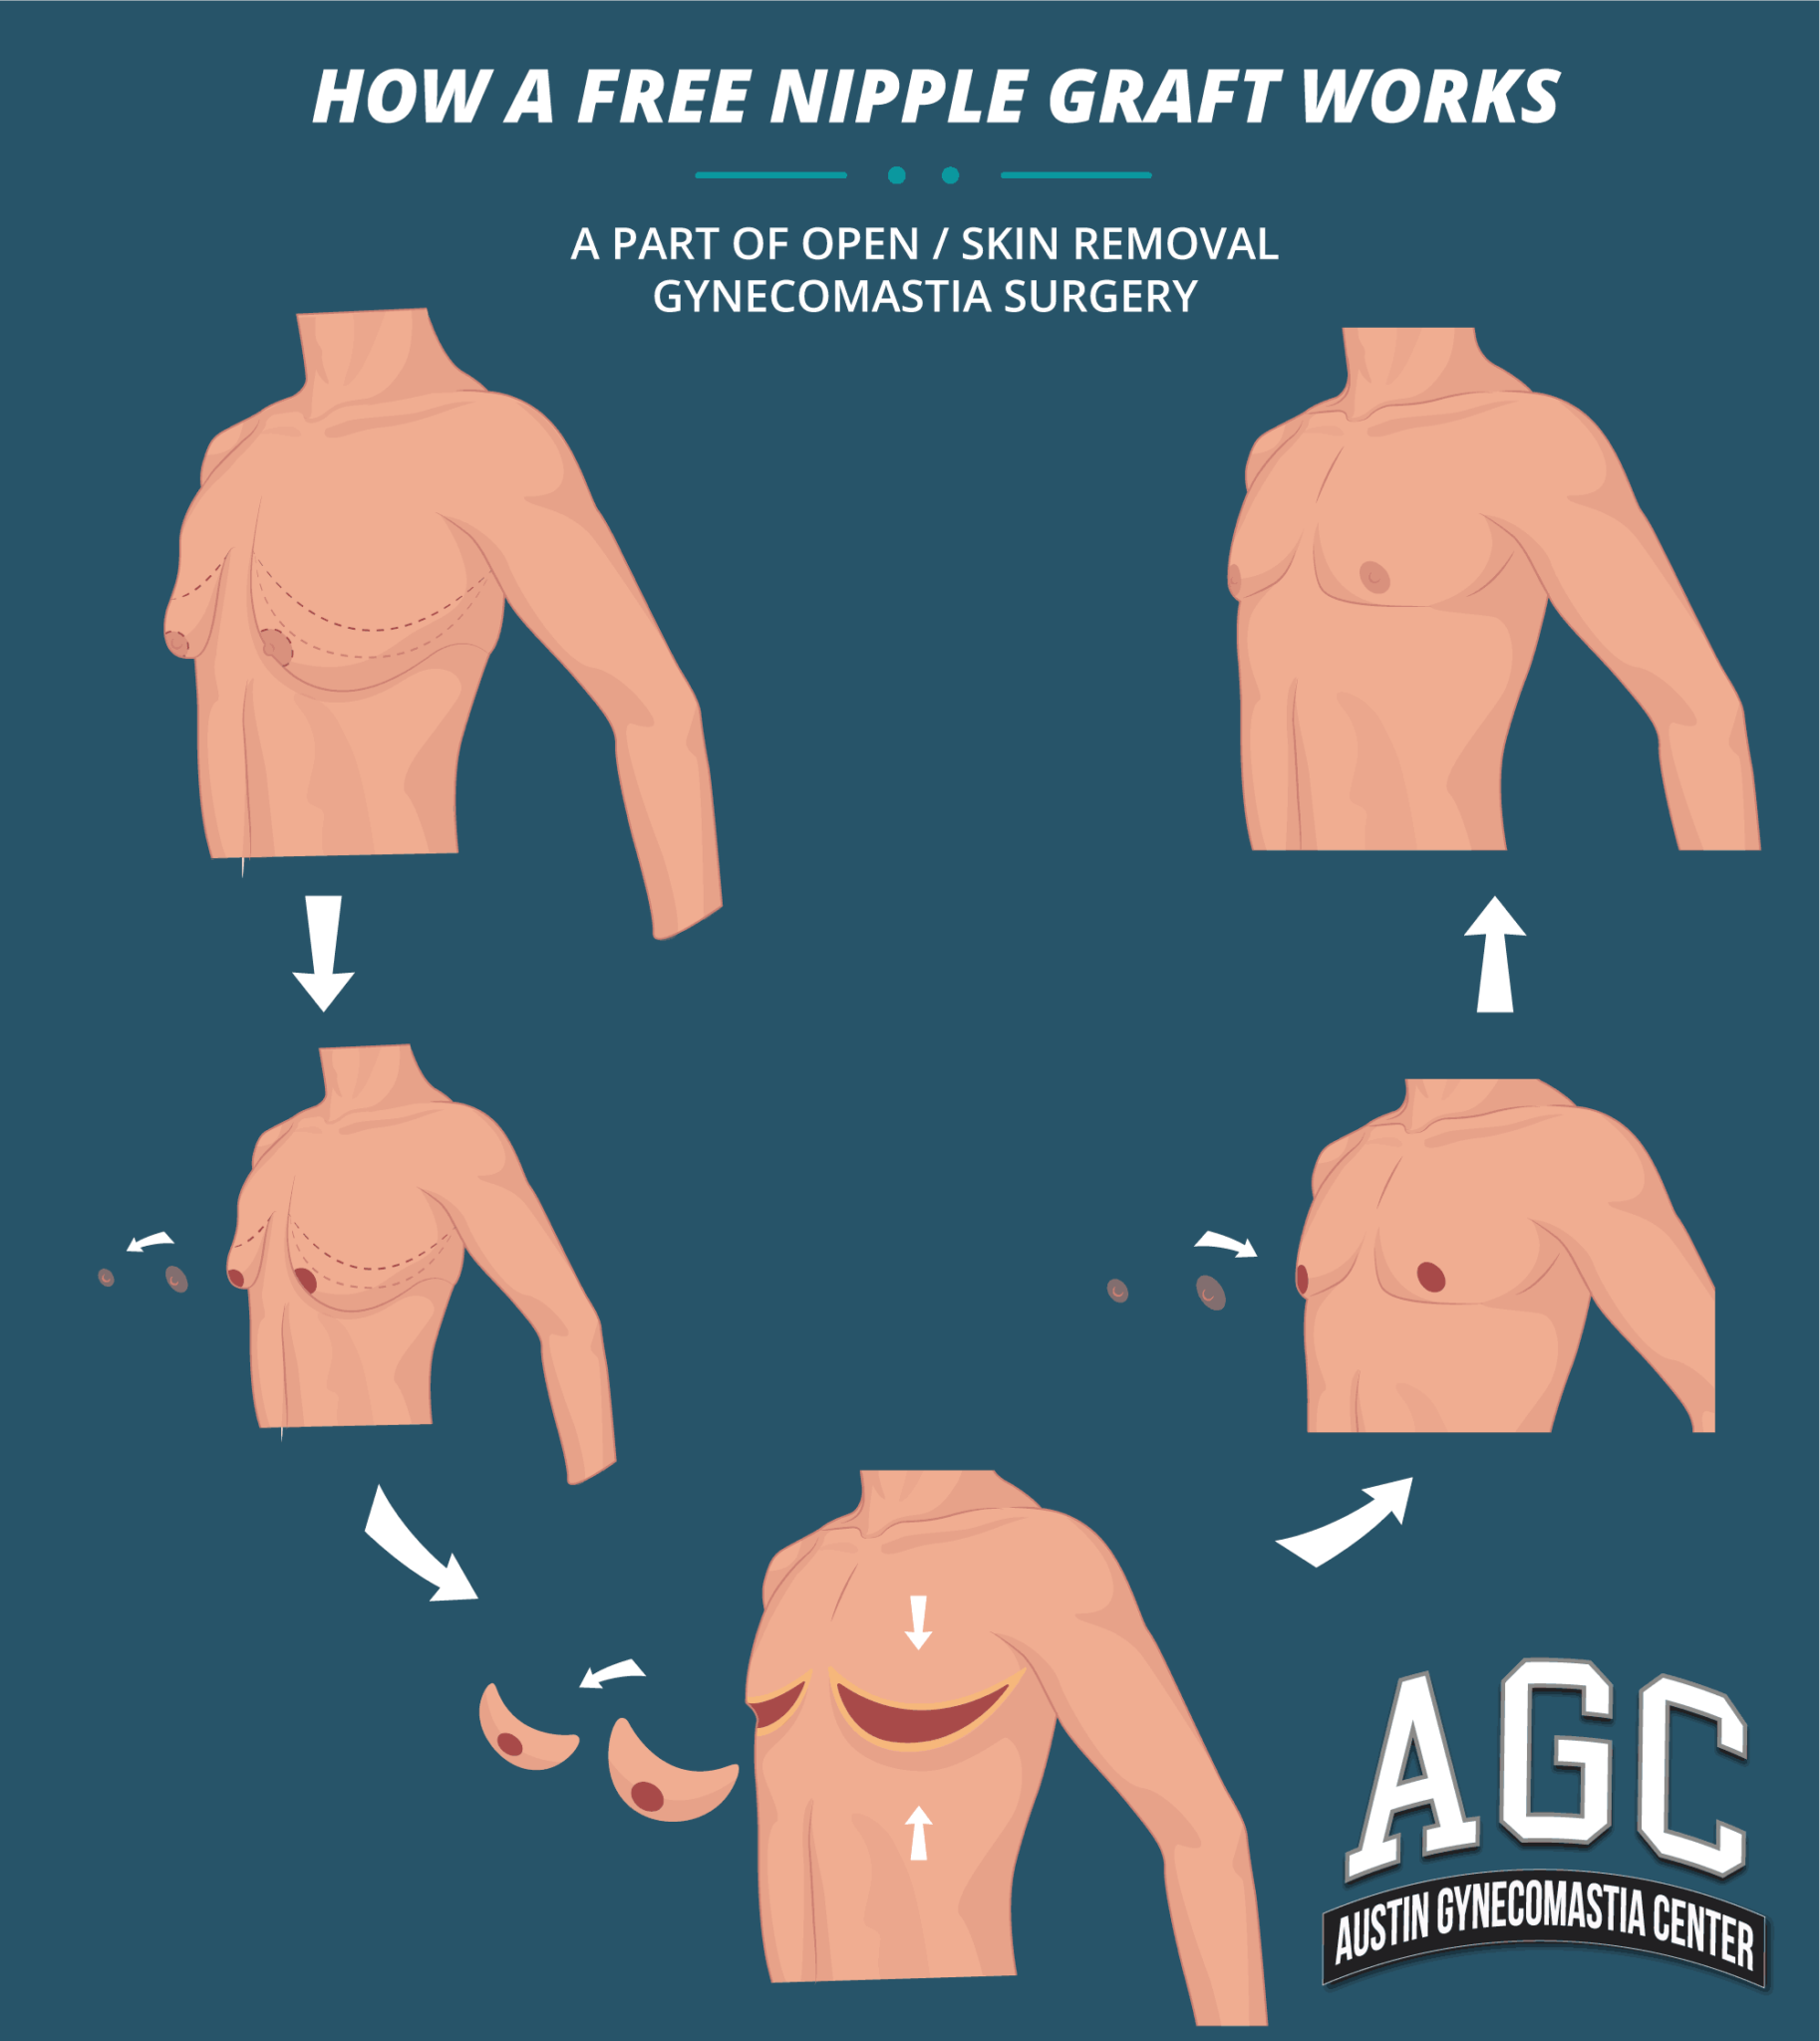 how a free nipple graft works, part of open / skin removal gynecomastia treatment